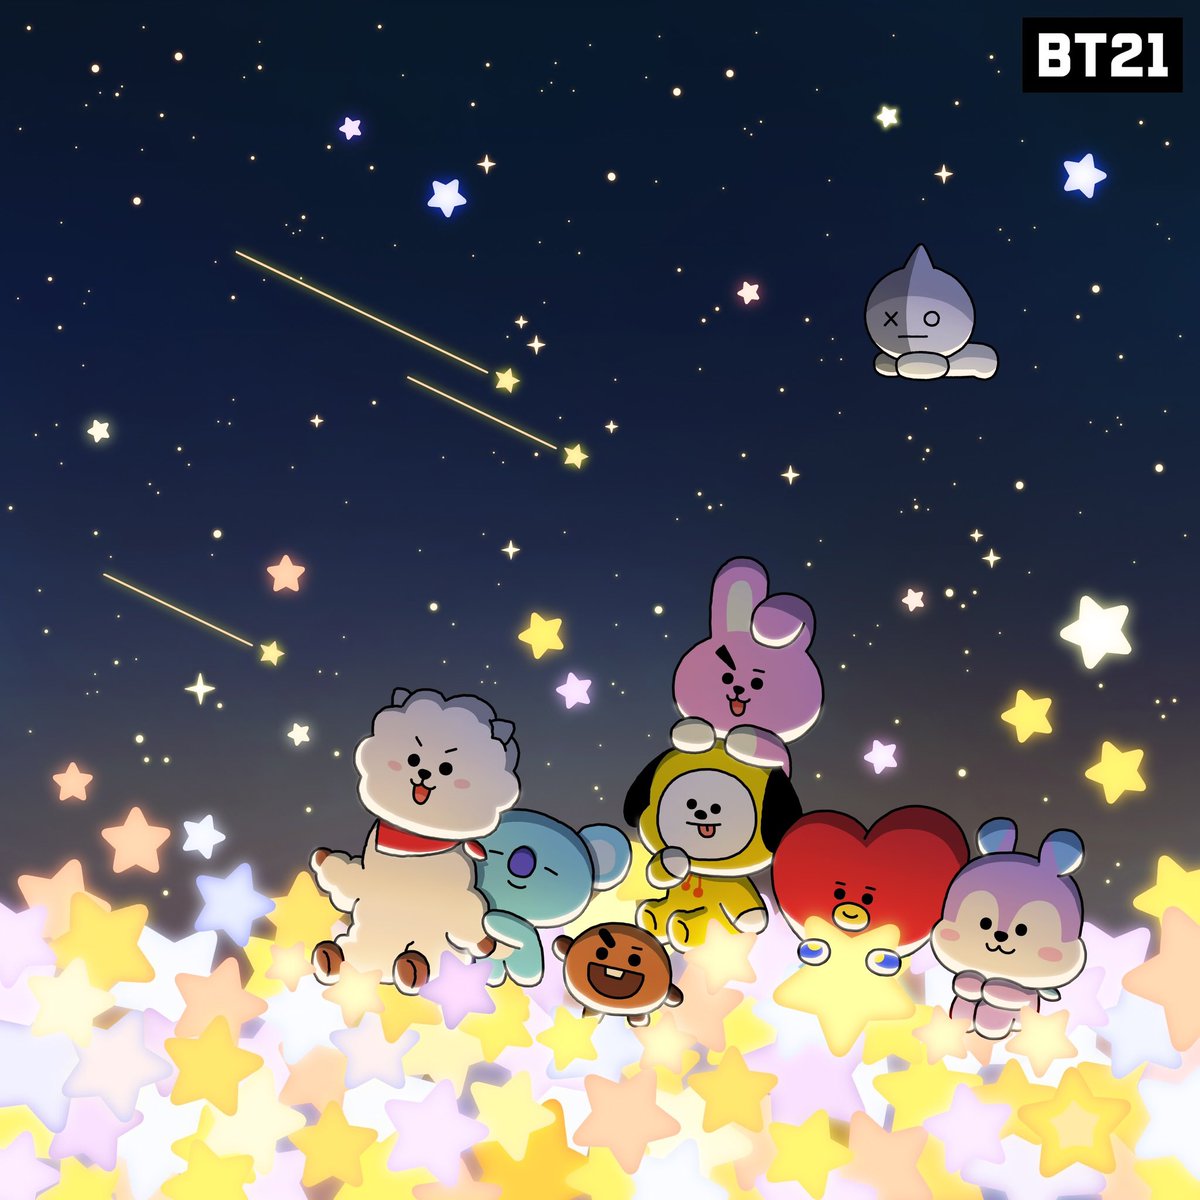 Together, like providence of the universe💫💜 #BT21 #UNIVERSTAR #galaxy #shootingstar #fall